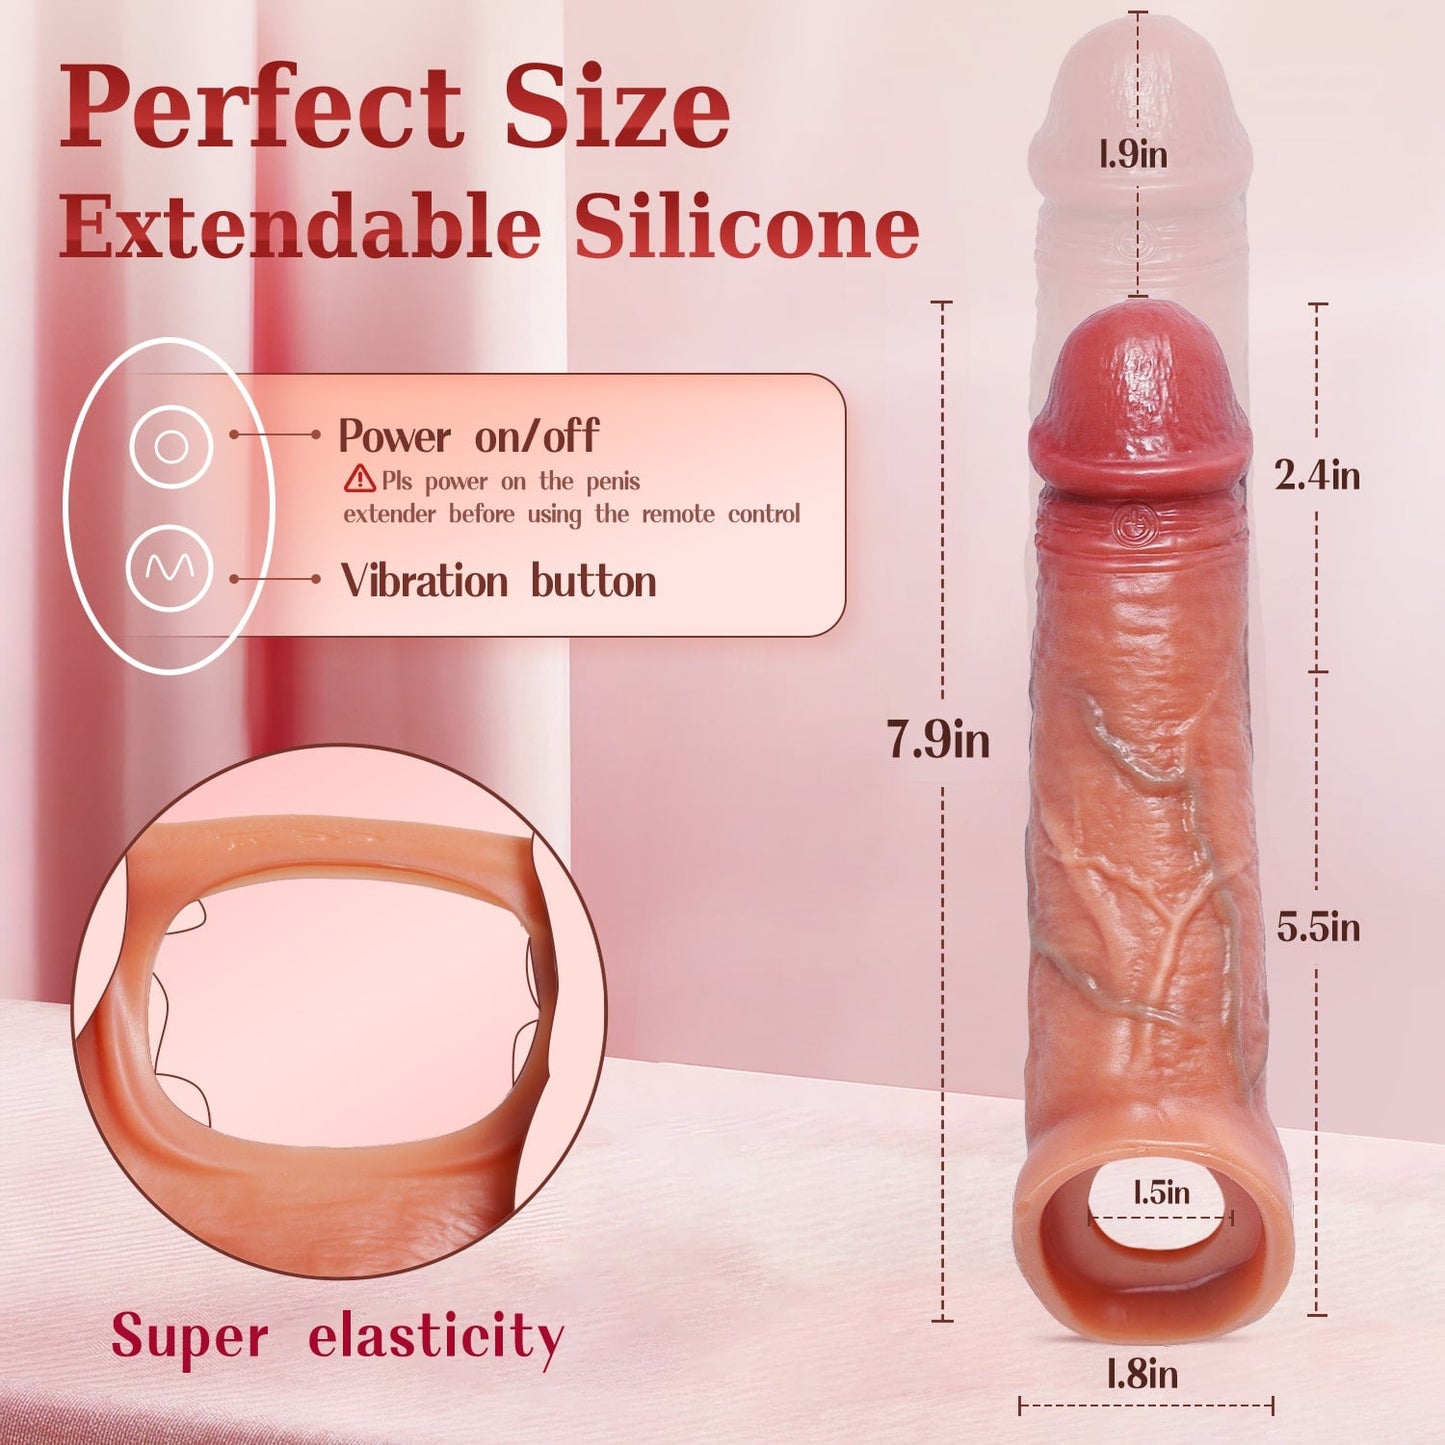 Cheeky | Penis Sleeve Cock Vibrator - 4IN1 Realistic Penis Extender Vibrating Cock Ring to Enlarge Prolong for Men - Couples